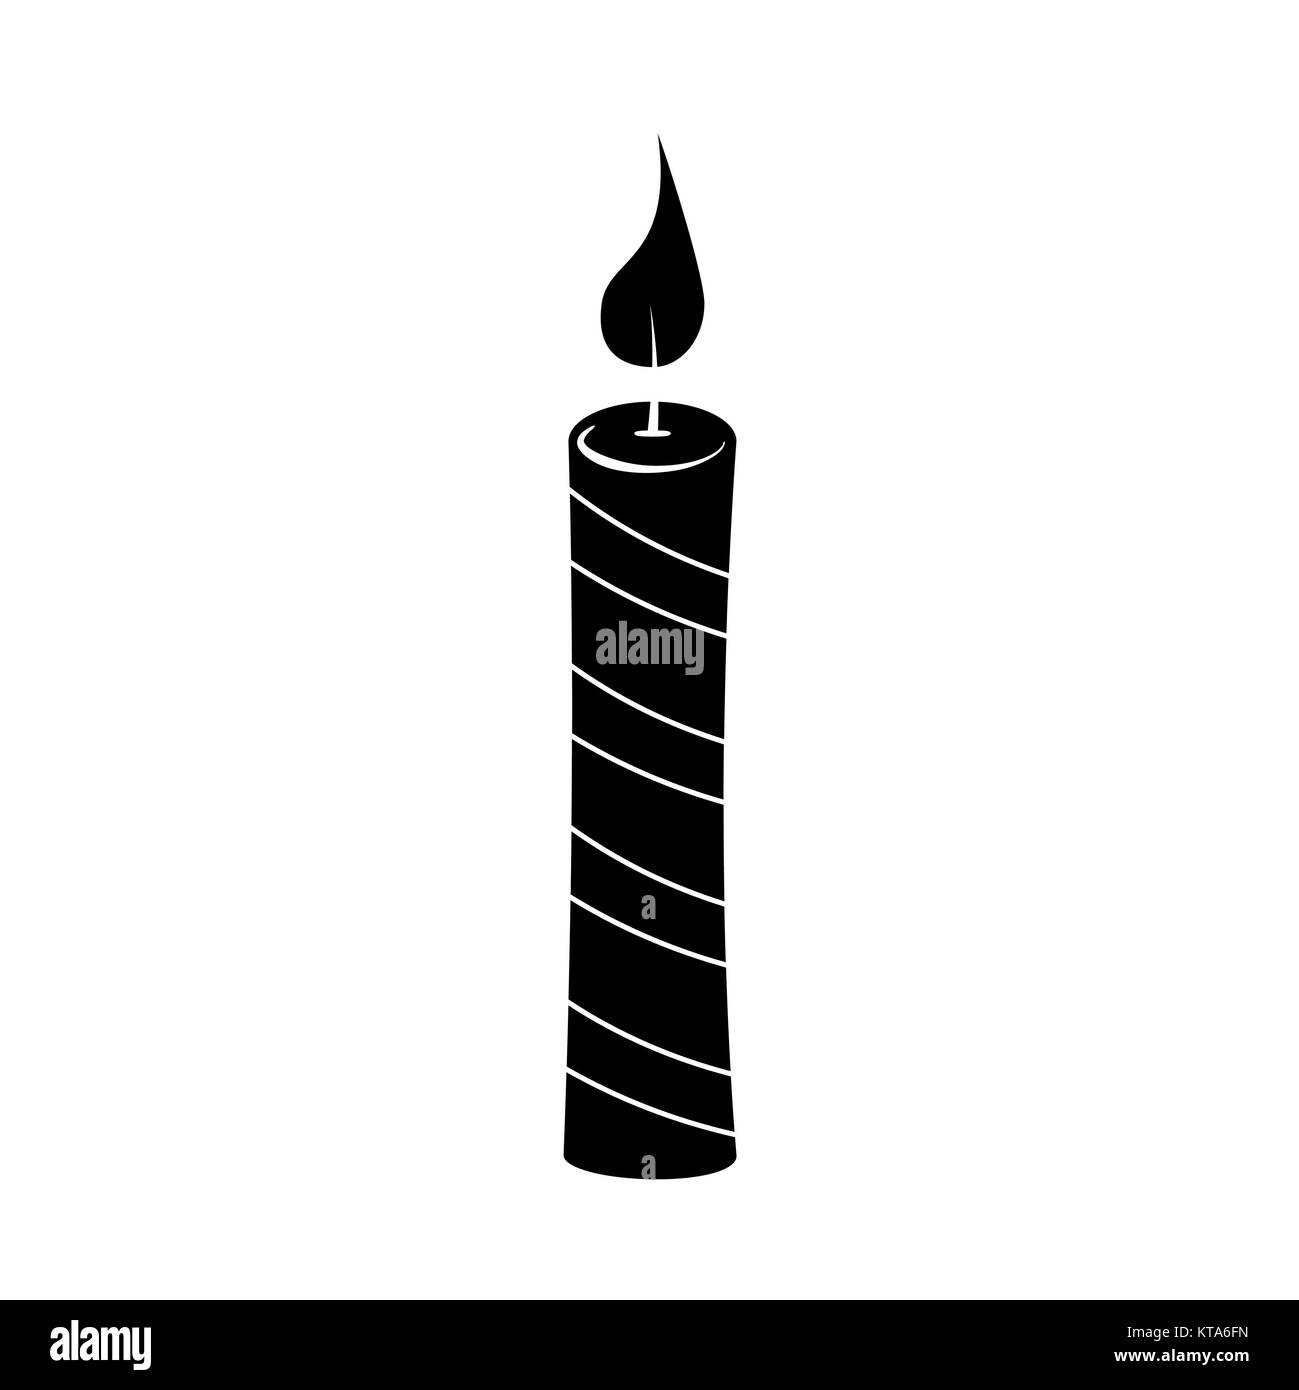 Candle silhouette Black and White Stock Photos & Images - Alamy